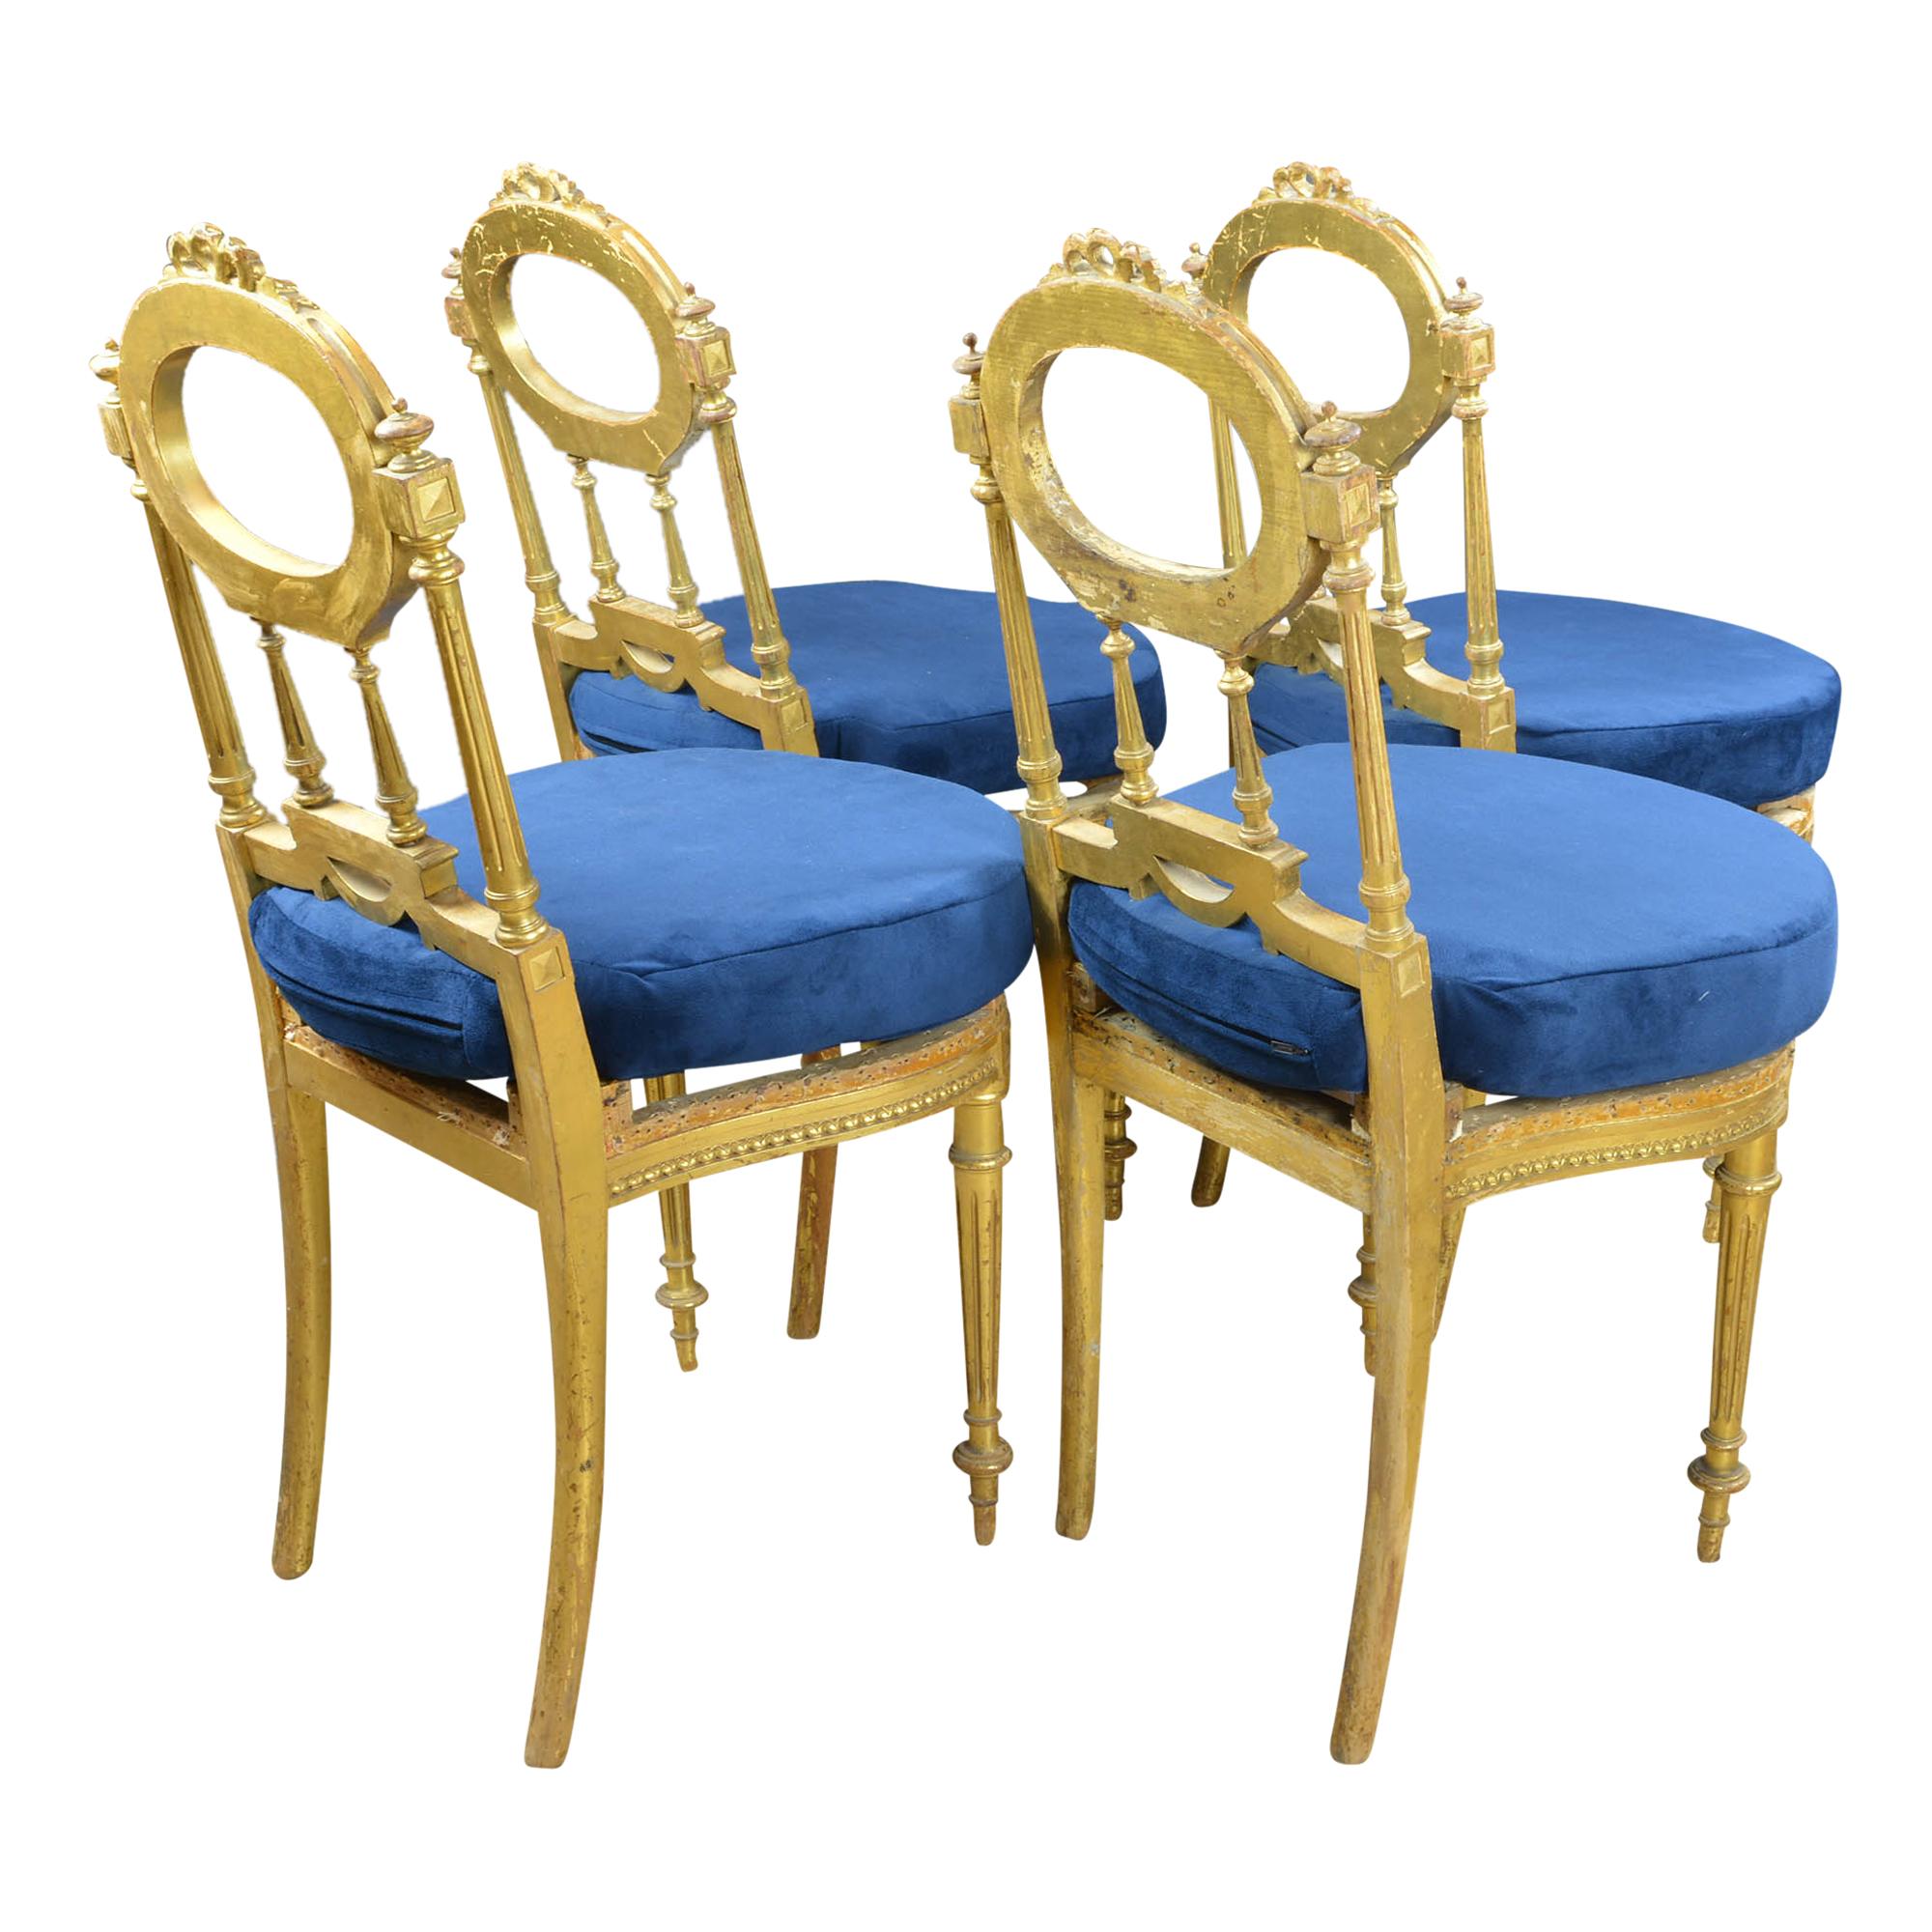 19th Century Antique Giltwood Chairs with Blue Velvet Cushions Set of 4 For Sale